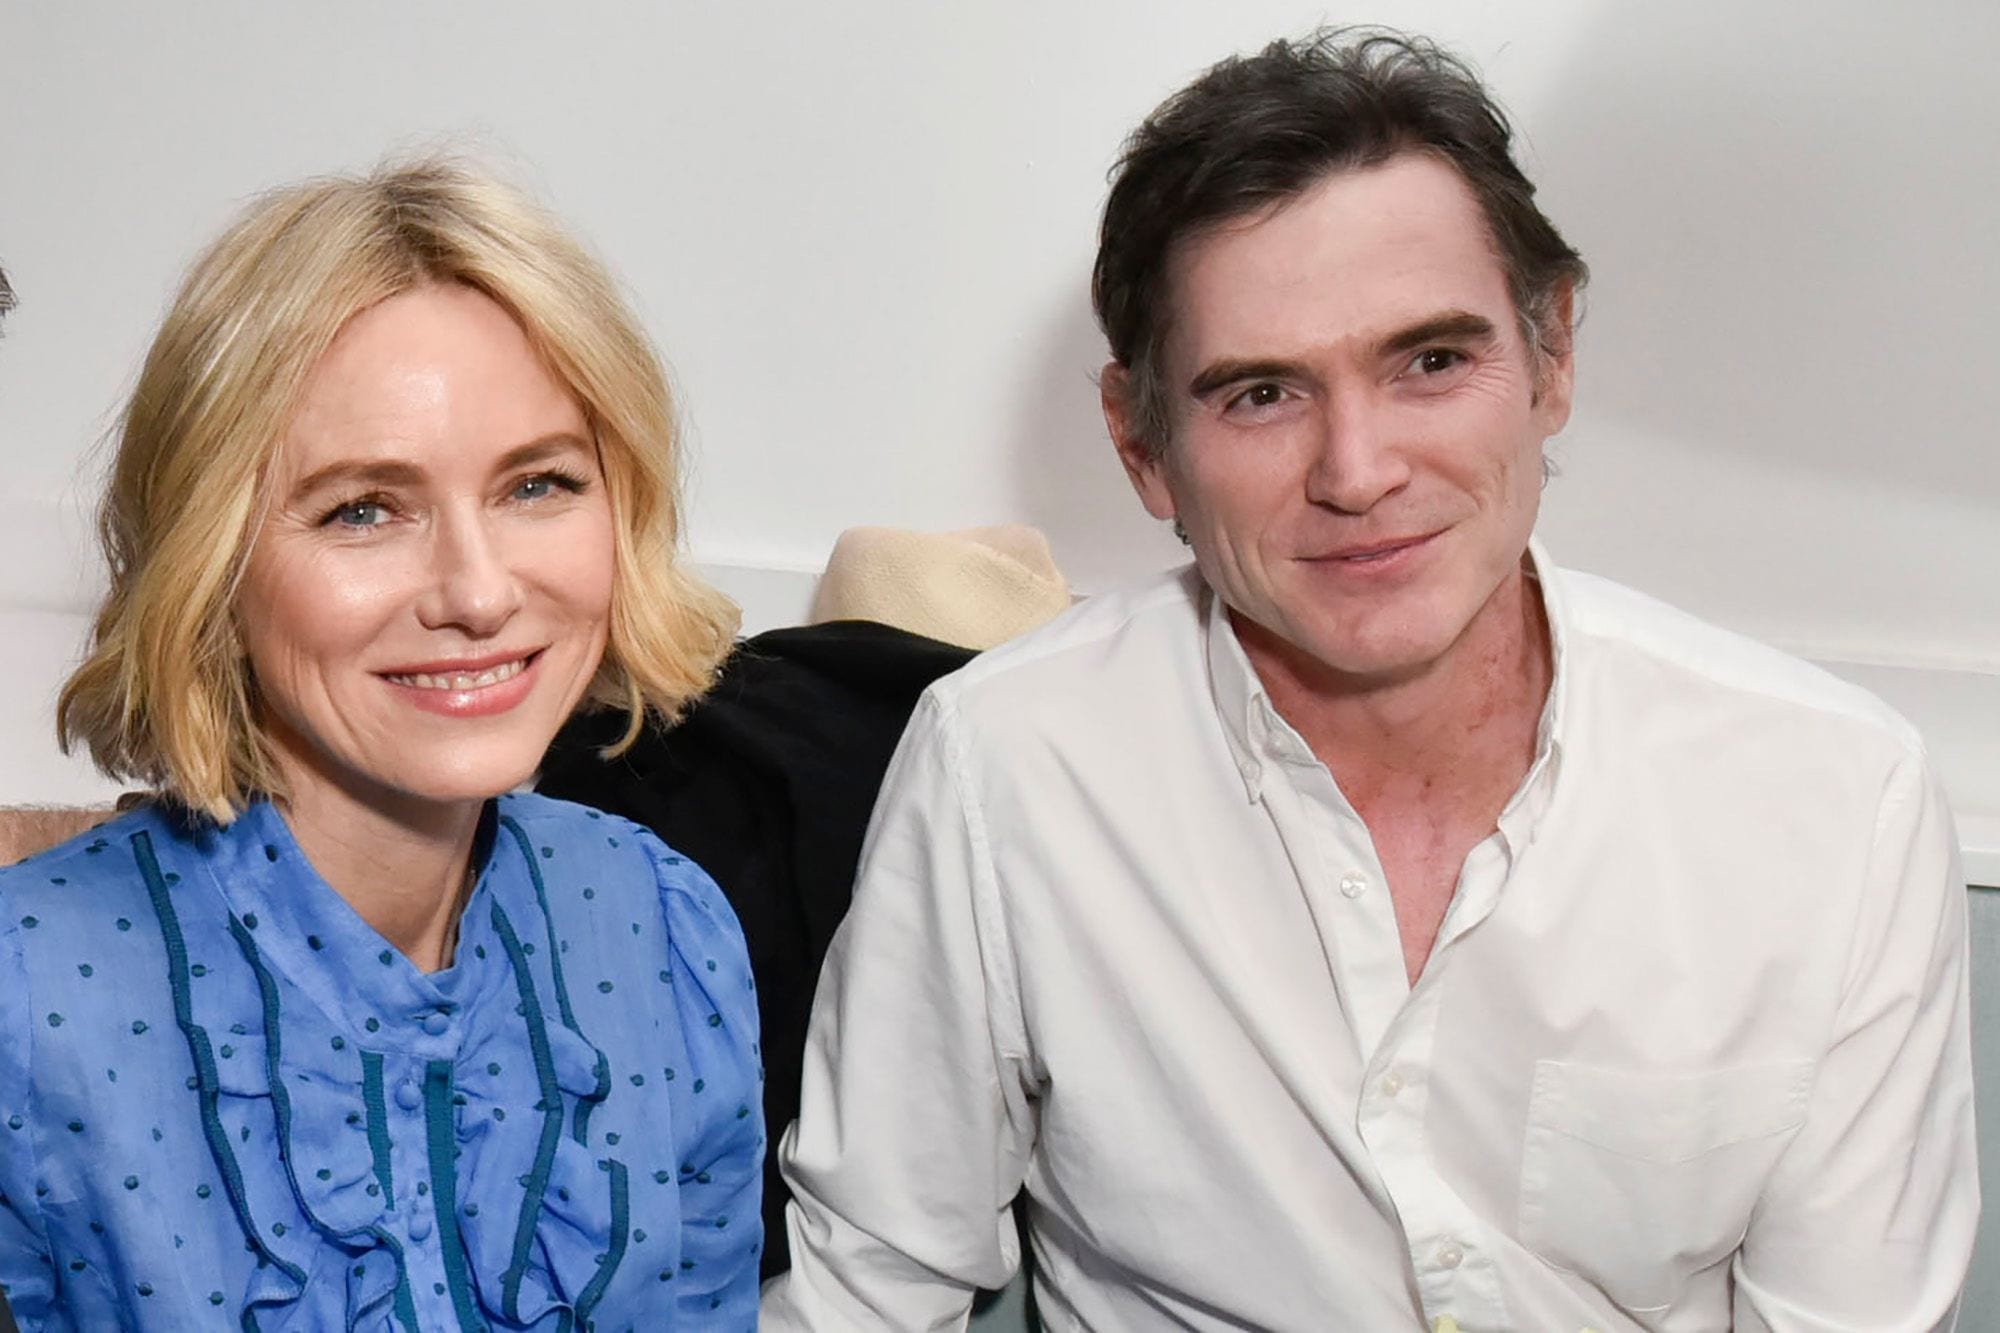 Who Is Naomi Watts Dating?